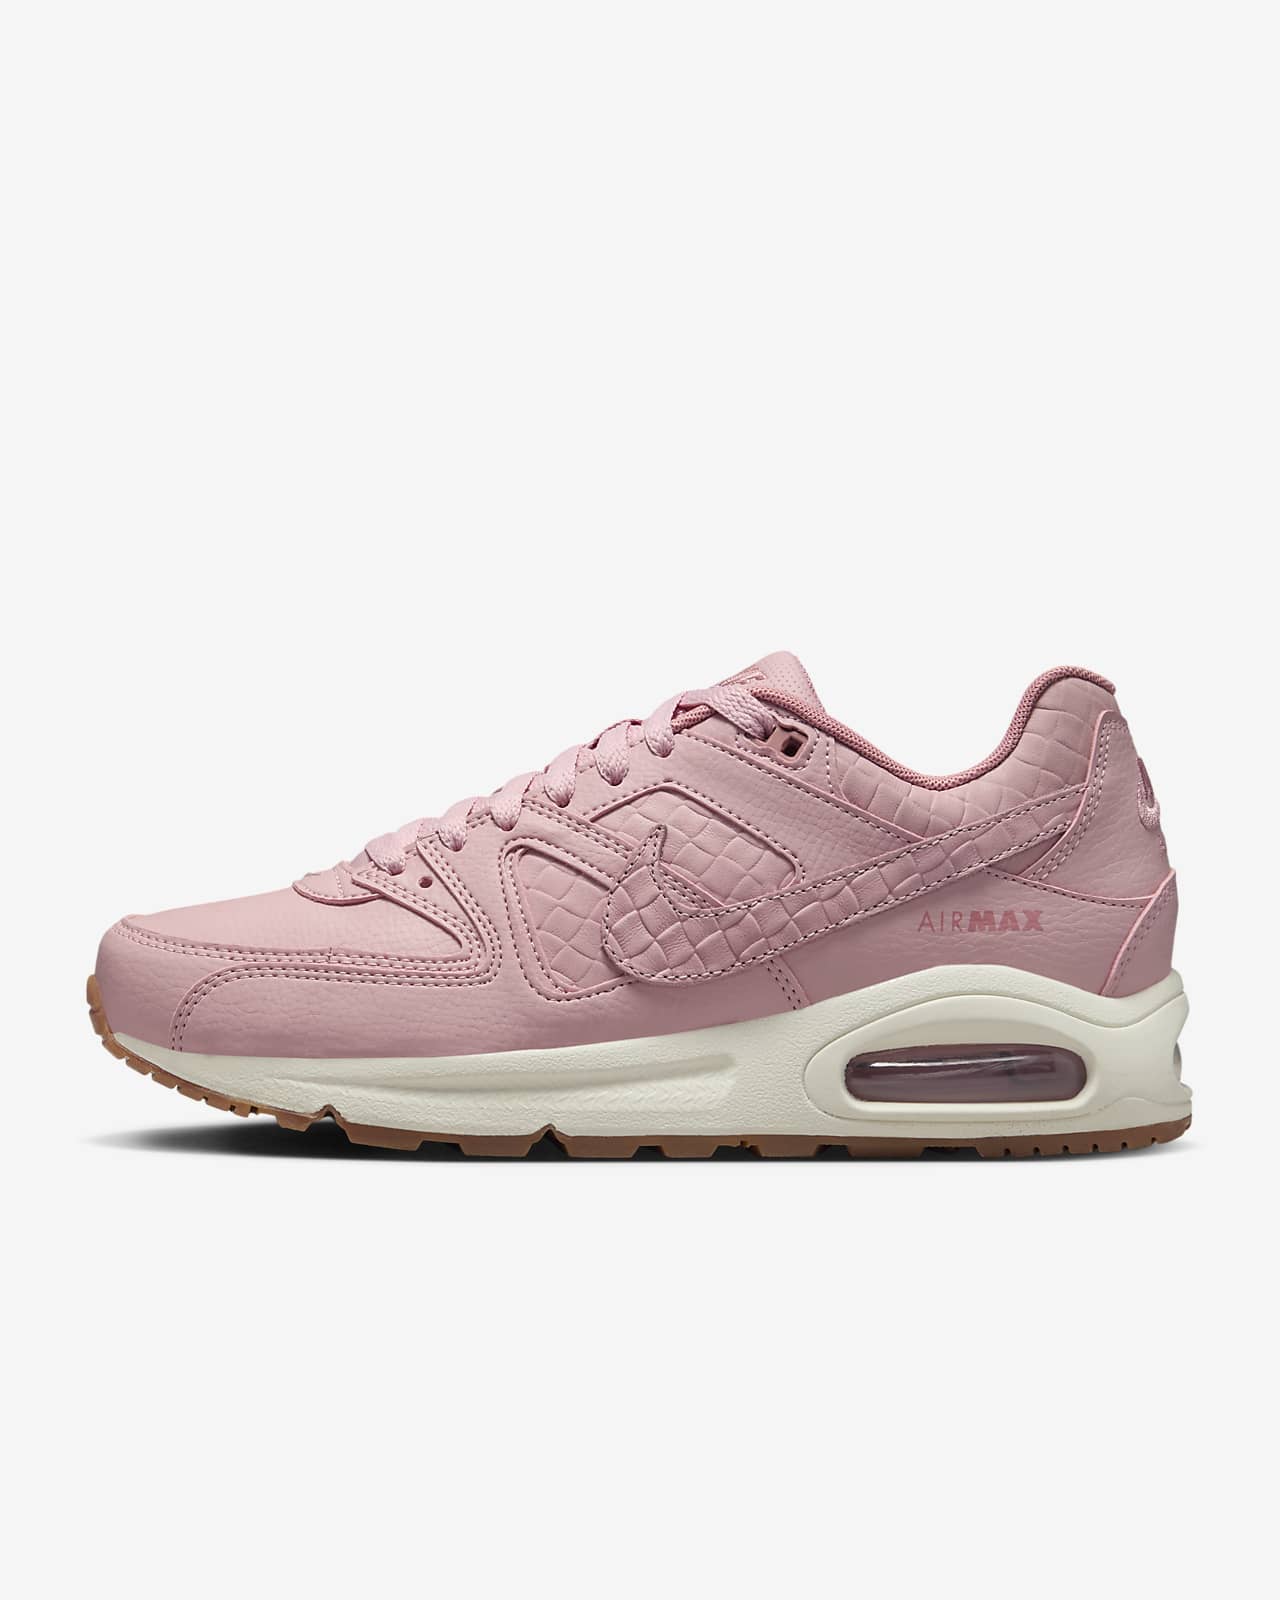 Nike Air Max Command Women's Shoes.